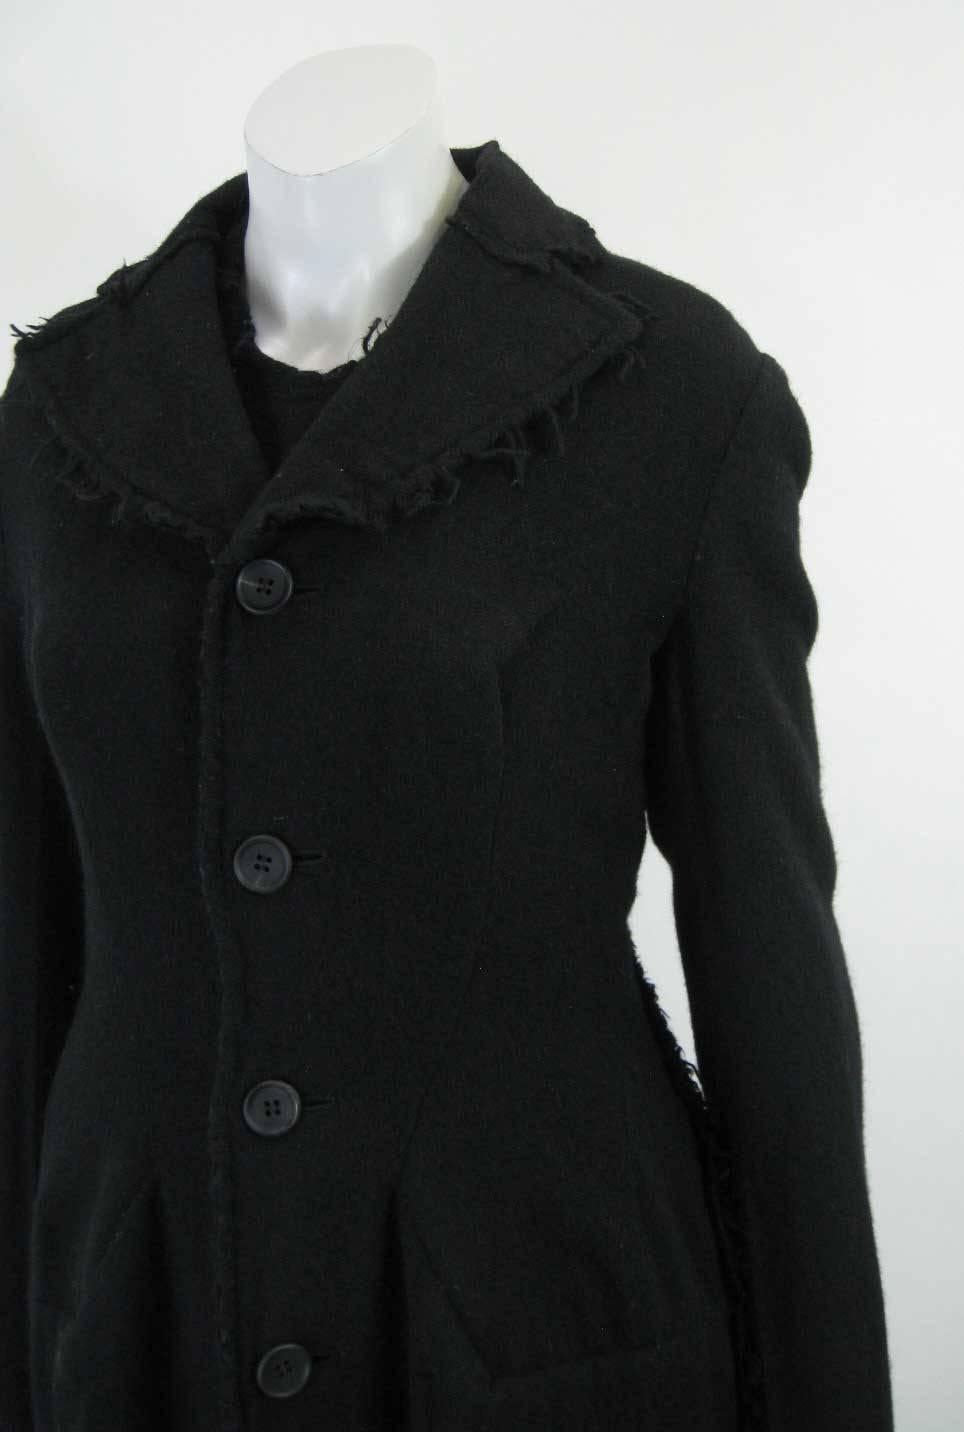 Circa 2003 Junya Watanabe for Comme des Garcons black wool coat and dress.

Fuzzy wool texture with frayed-edge details throughout.

Long coat wis fitted through waist then flares. 

Coat features four button closure, side pockets and back